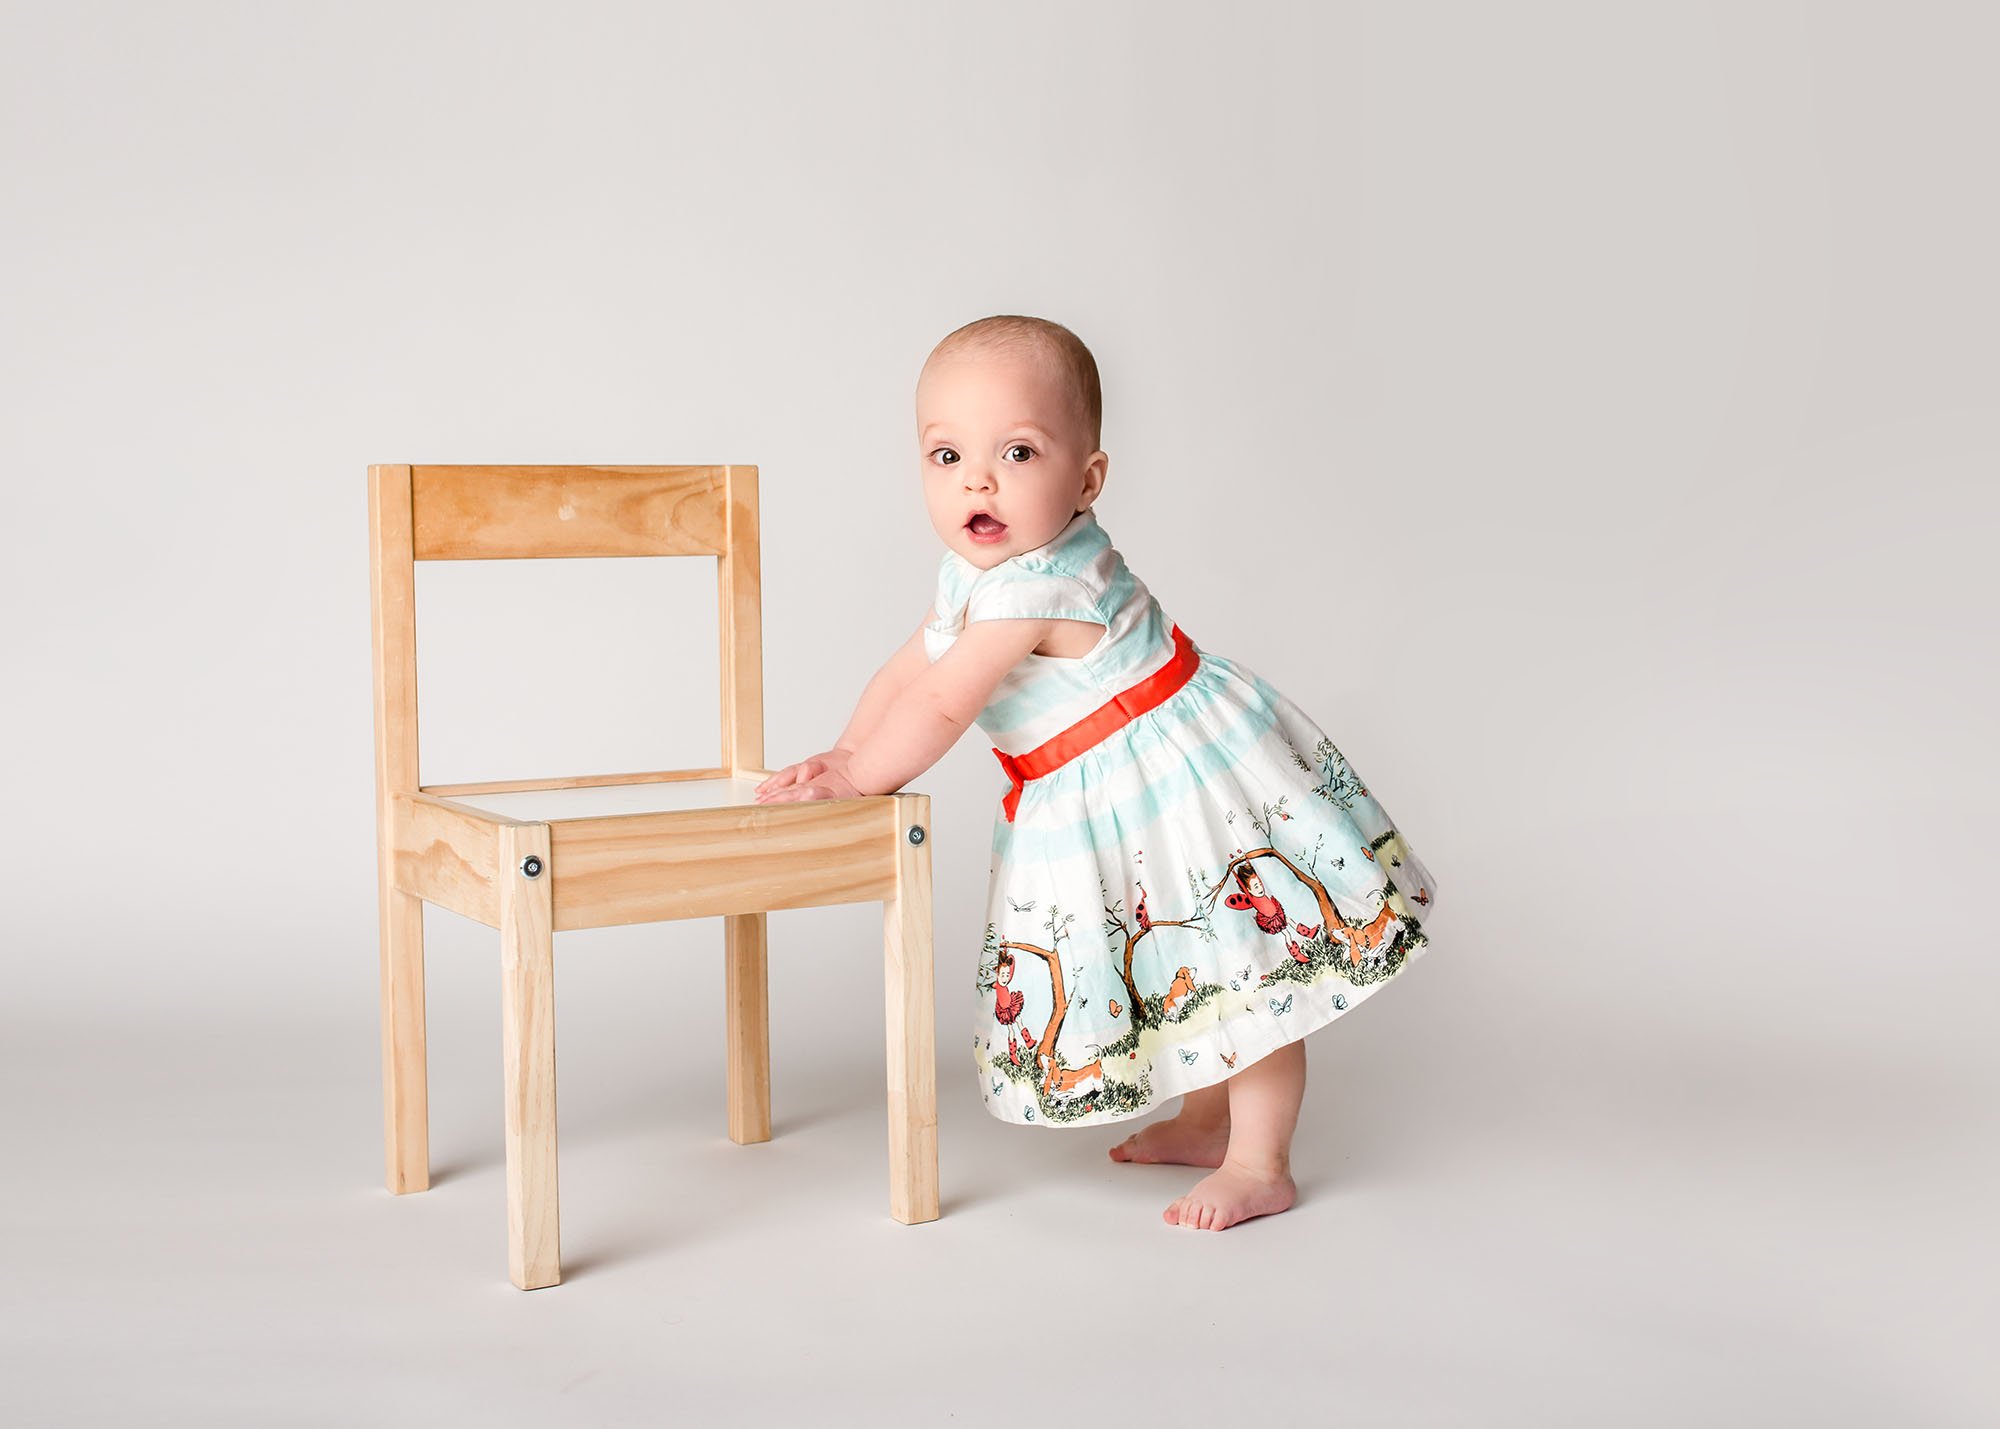 one year old baby girl in ladybug dress standing up holding onto a chair Glastonbury CT Baby Photographer One Big Happy Photo www.onebighappyphoto.com/babies